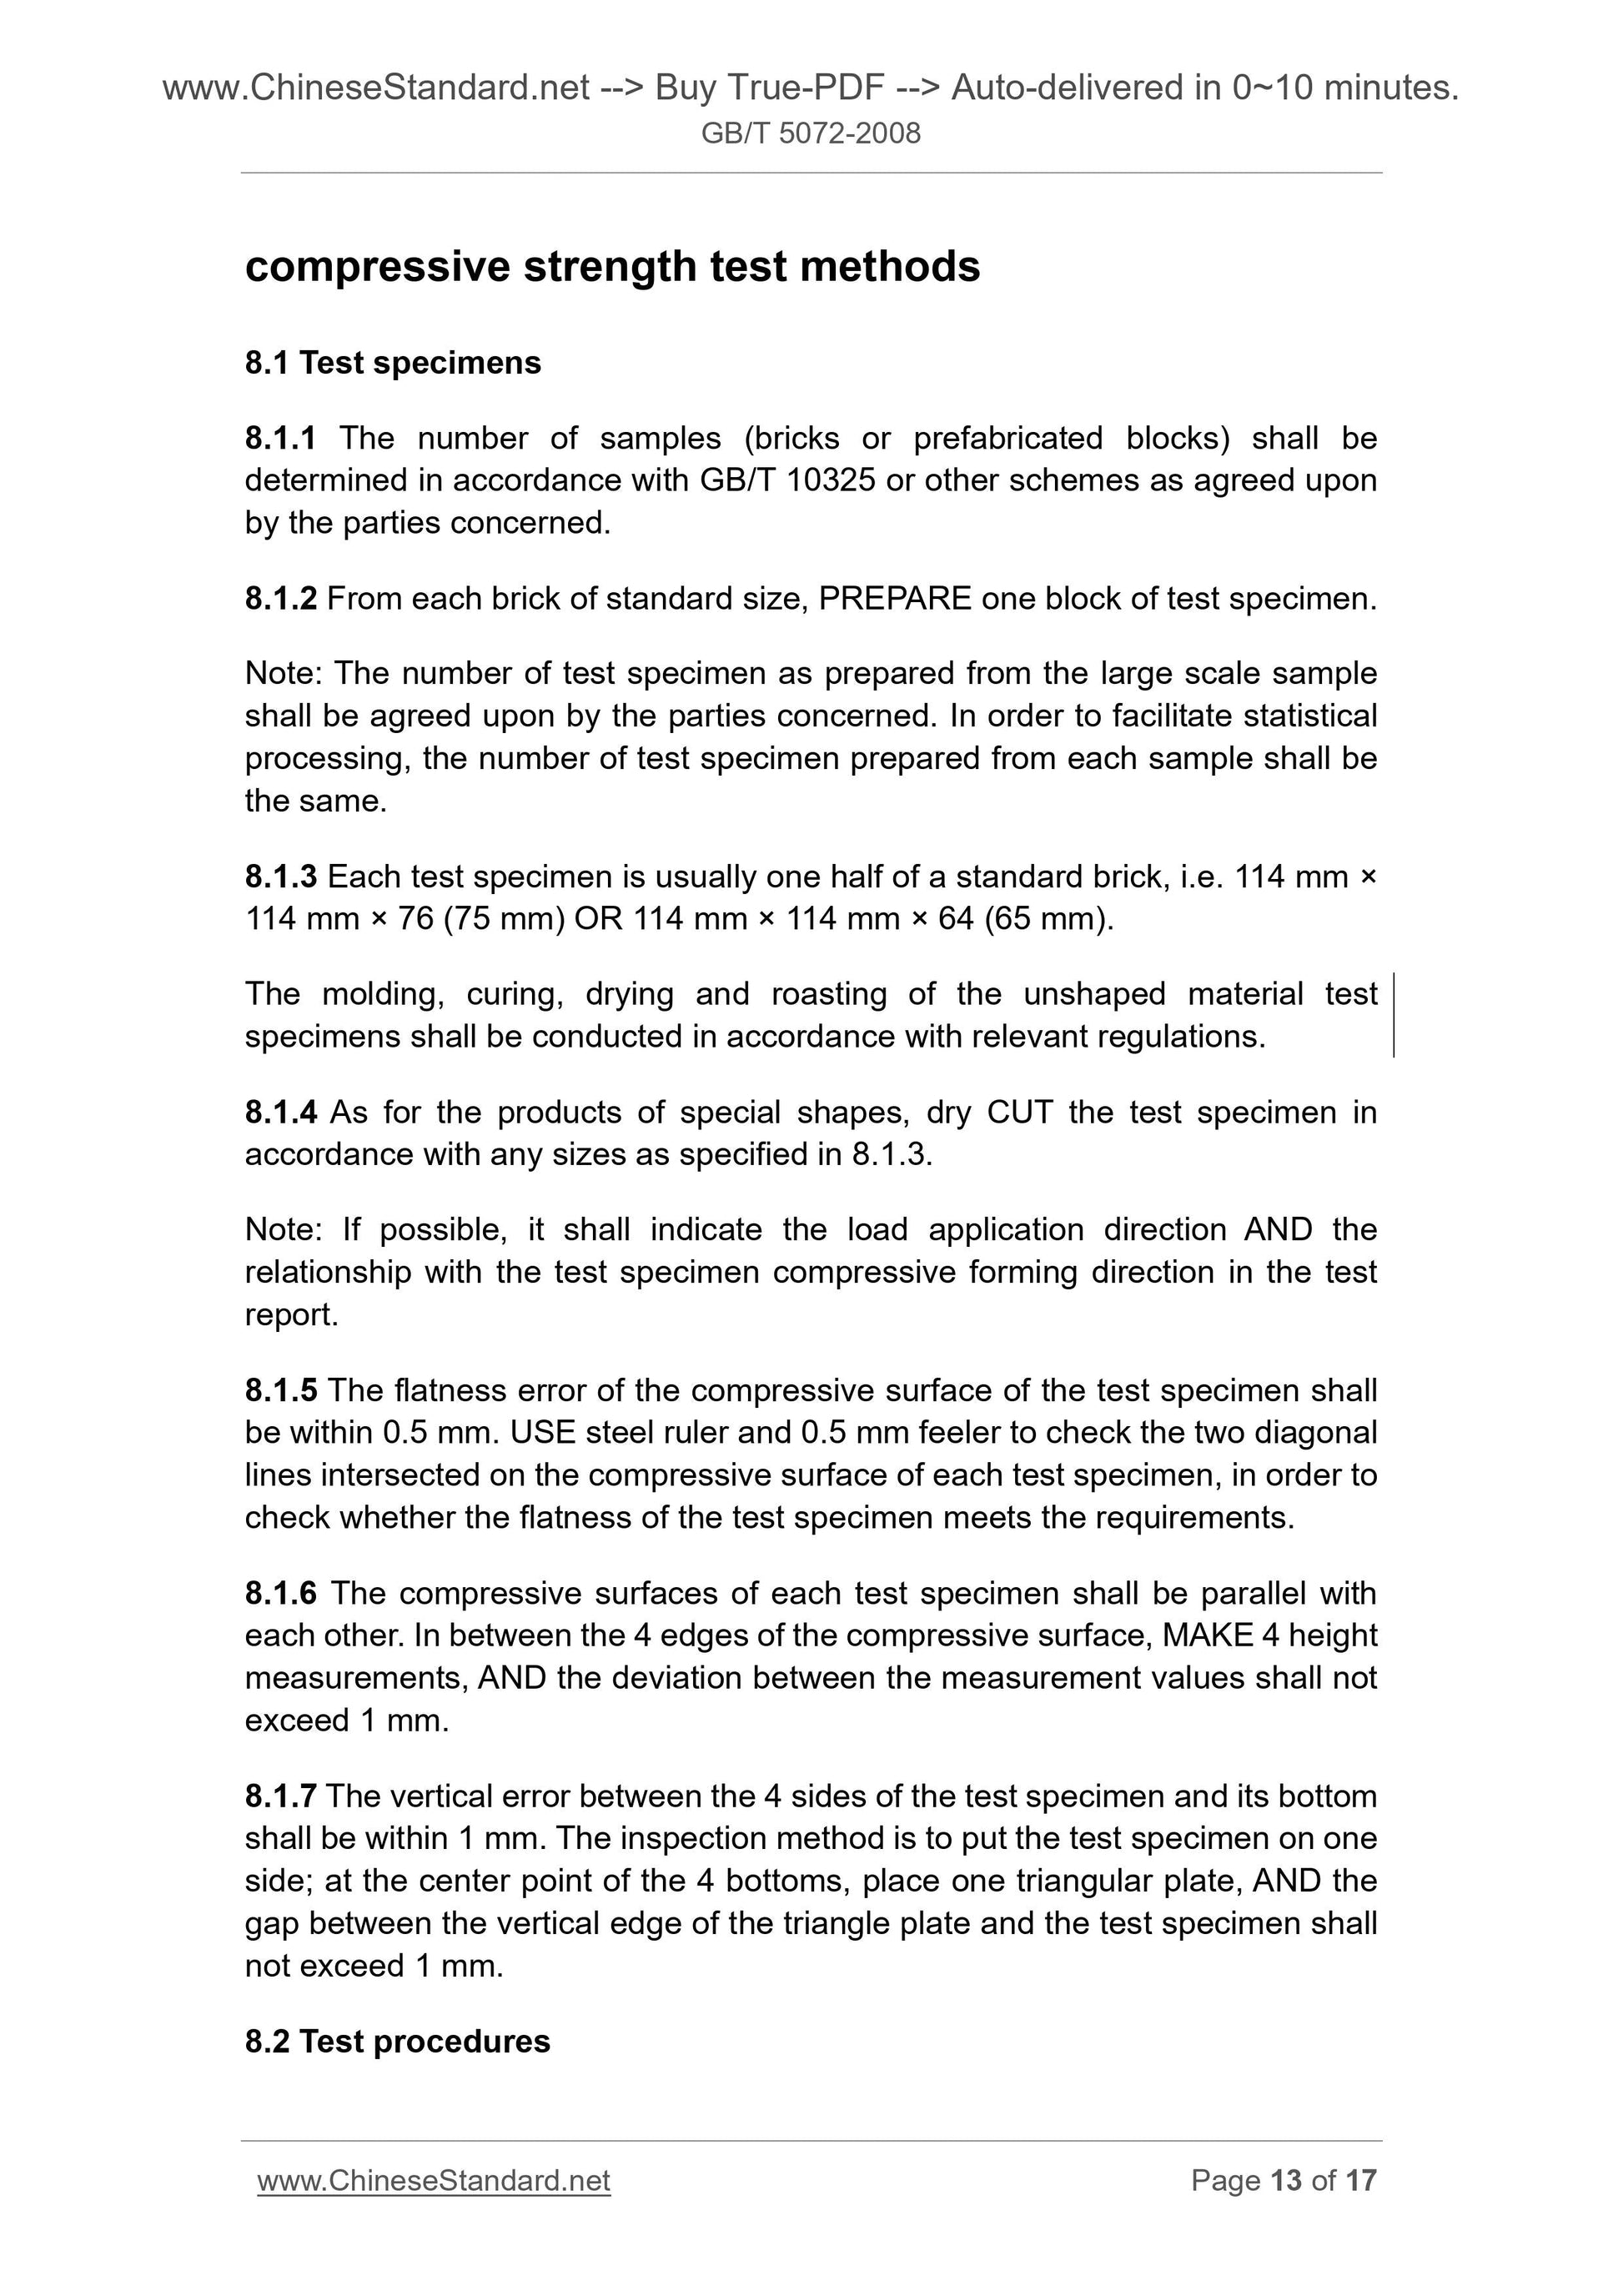 GB/T 5072-2008 Page 8